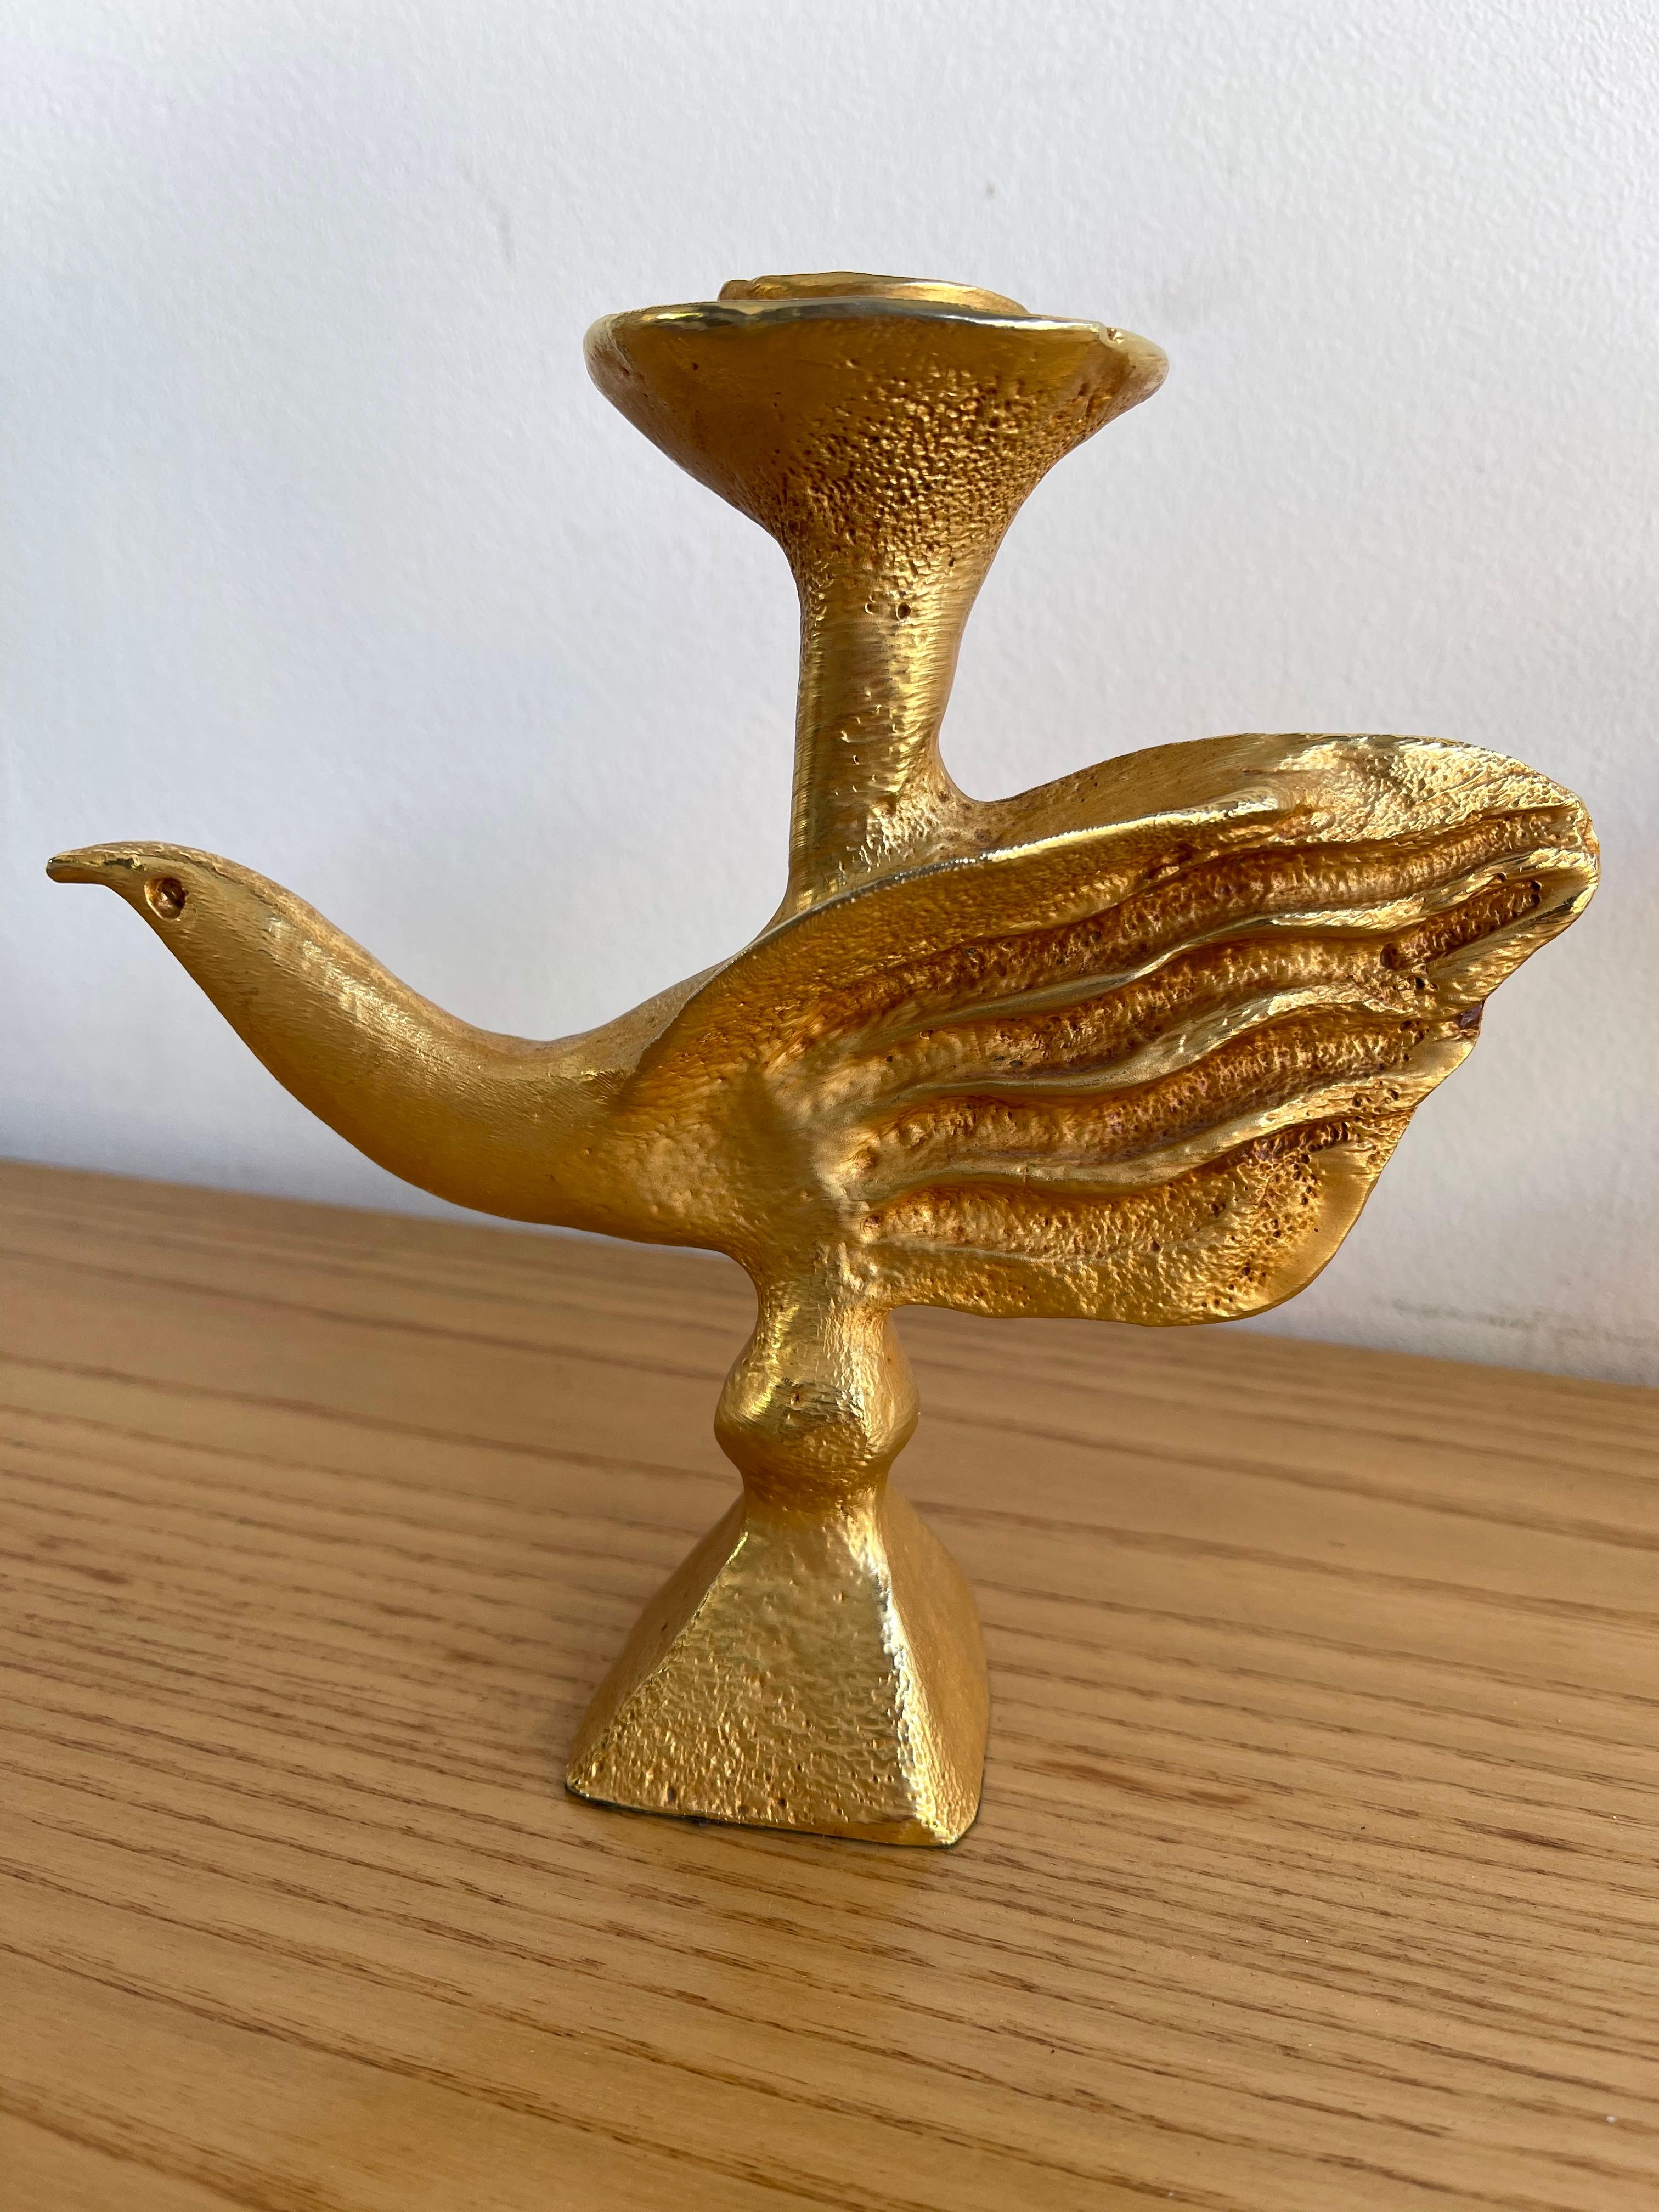 Pair of bird candle holders, candlesticks or candelabras in gilt metal bronze style by Pierre Casenove for Fondica. Sign Casenove. The tallest version of this model. Famous artist who have worked for the manufacture like Nicolas Dewael, Stéphane